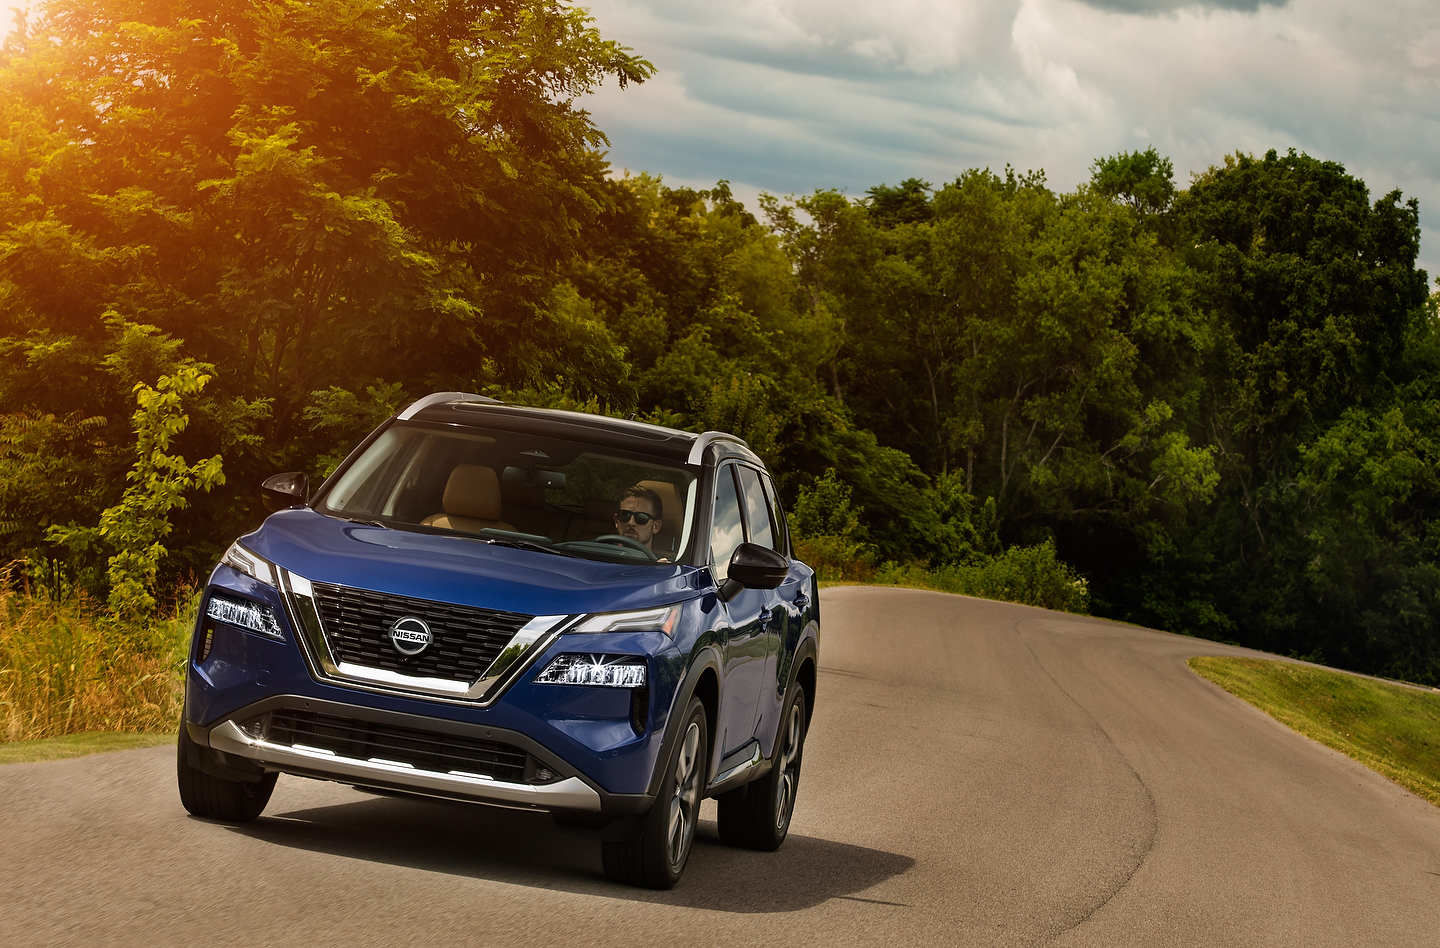 Three Technologies Offered on the 2021 Nissan Rogue That Make Your Family Safer